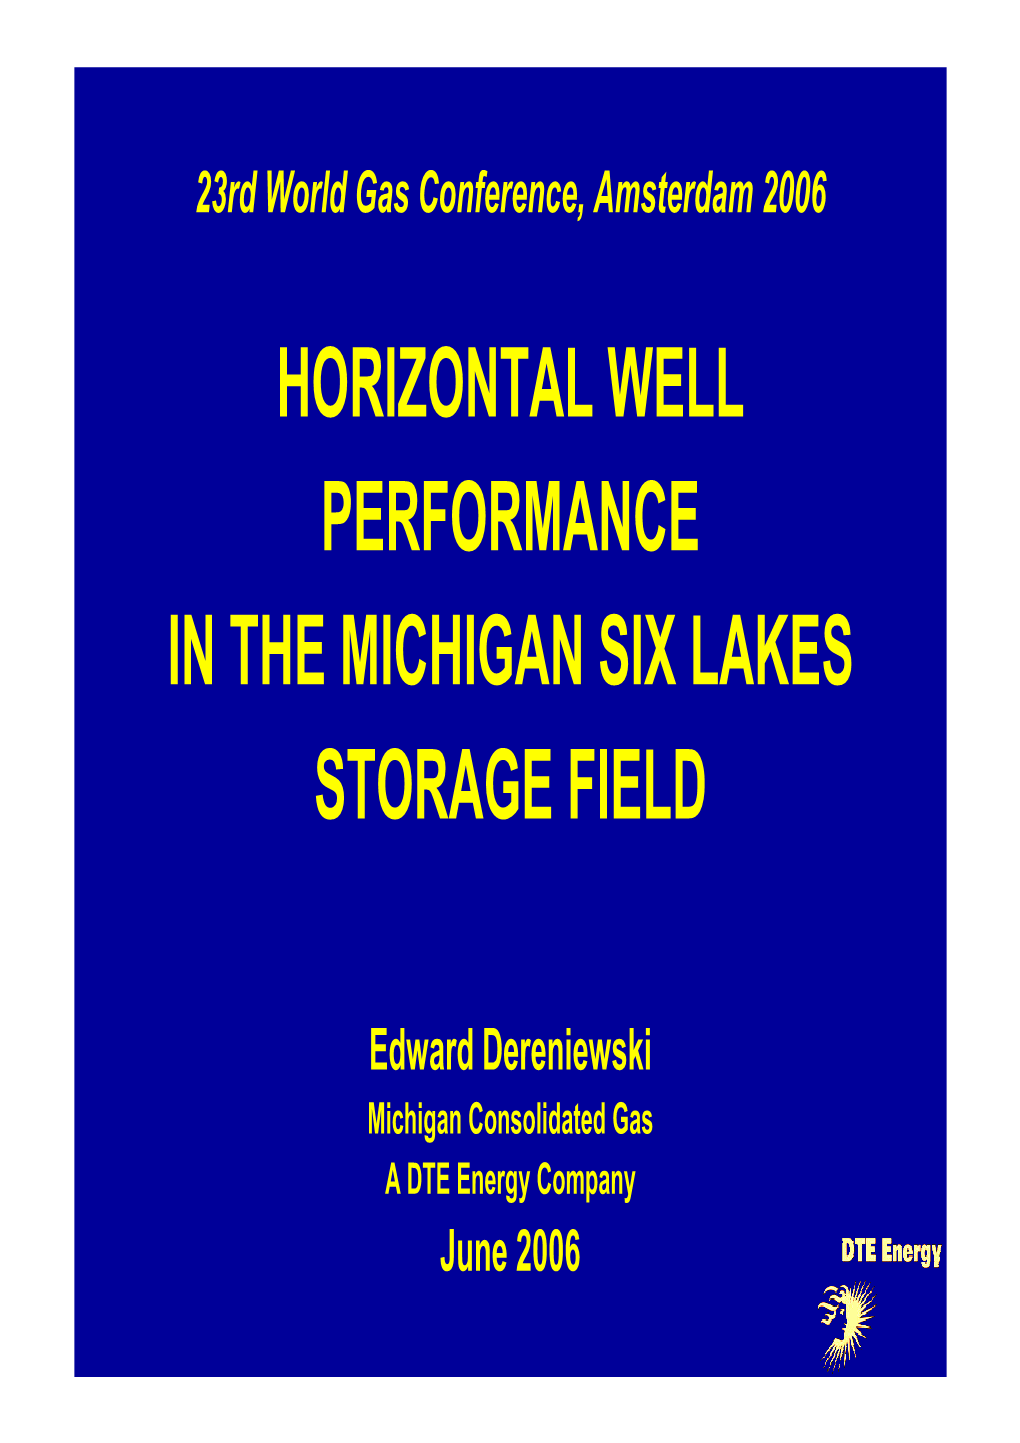 Horizontal Well Performance in the Michigan Six Lakes Storage Field